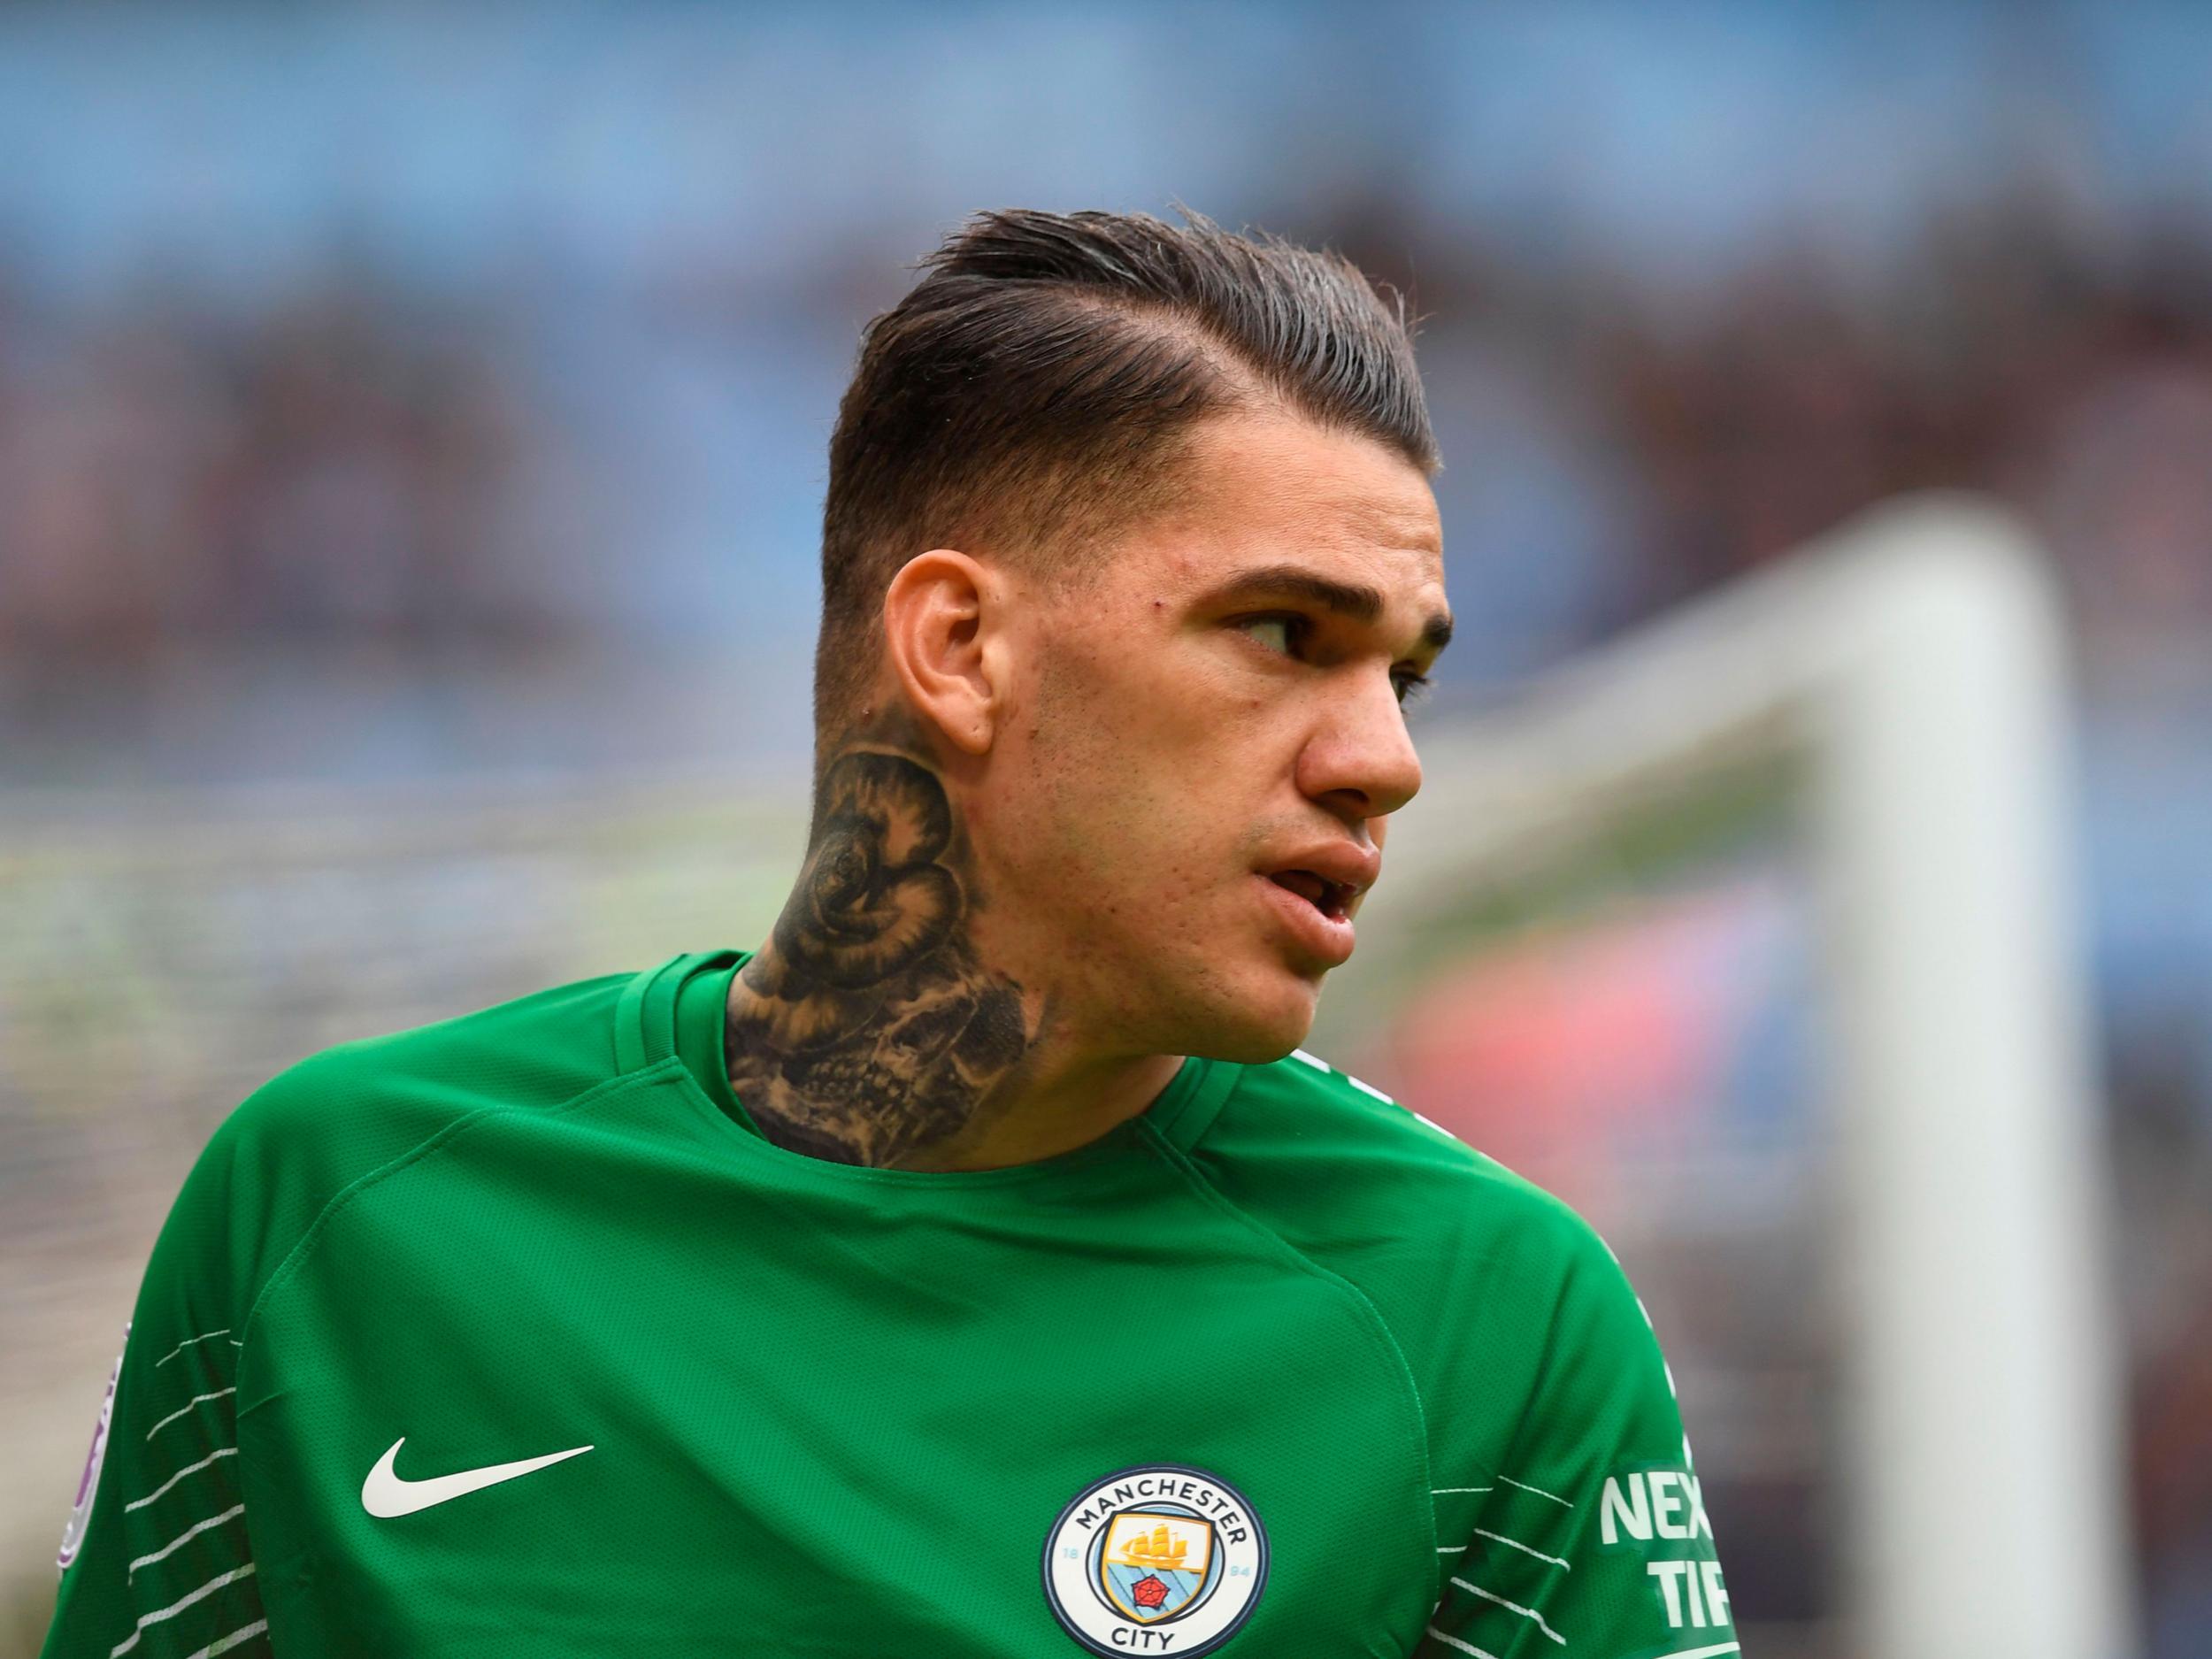  Ederson Moraes is a Brazilian professional footballer who plays as a goalkeeper for Premier League club Manchester City and the Brazil national team.